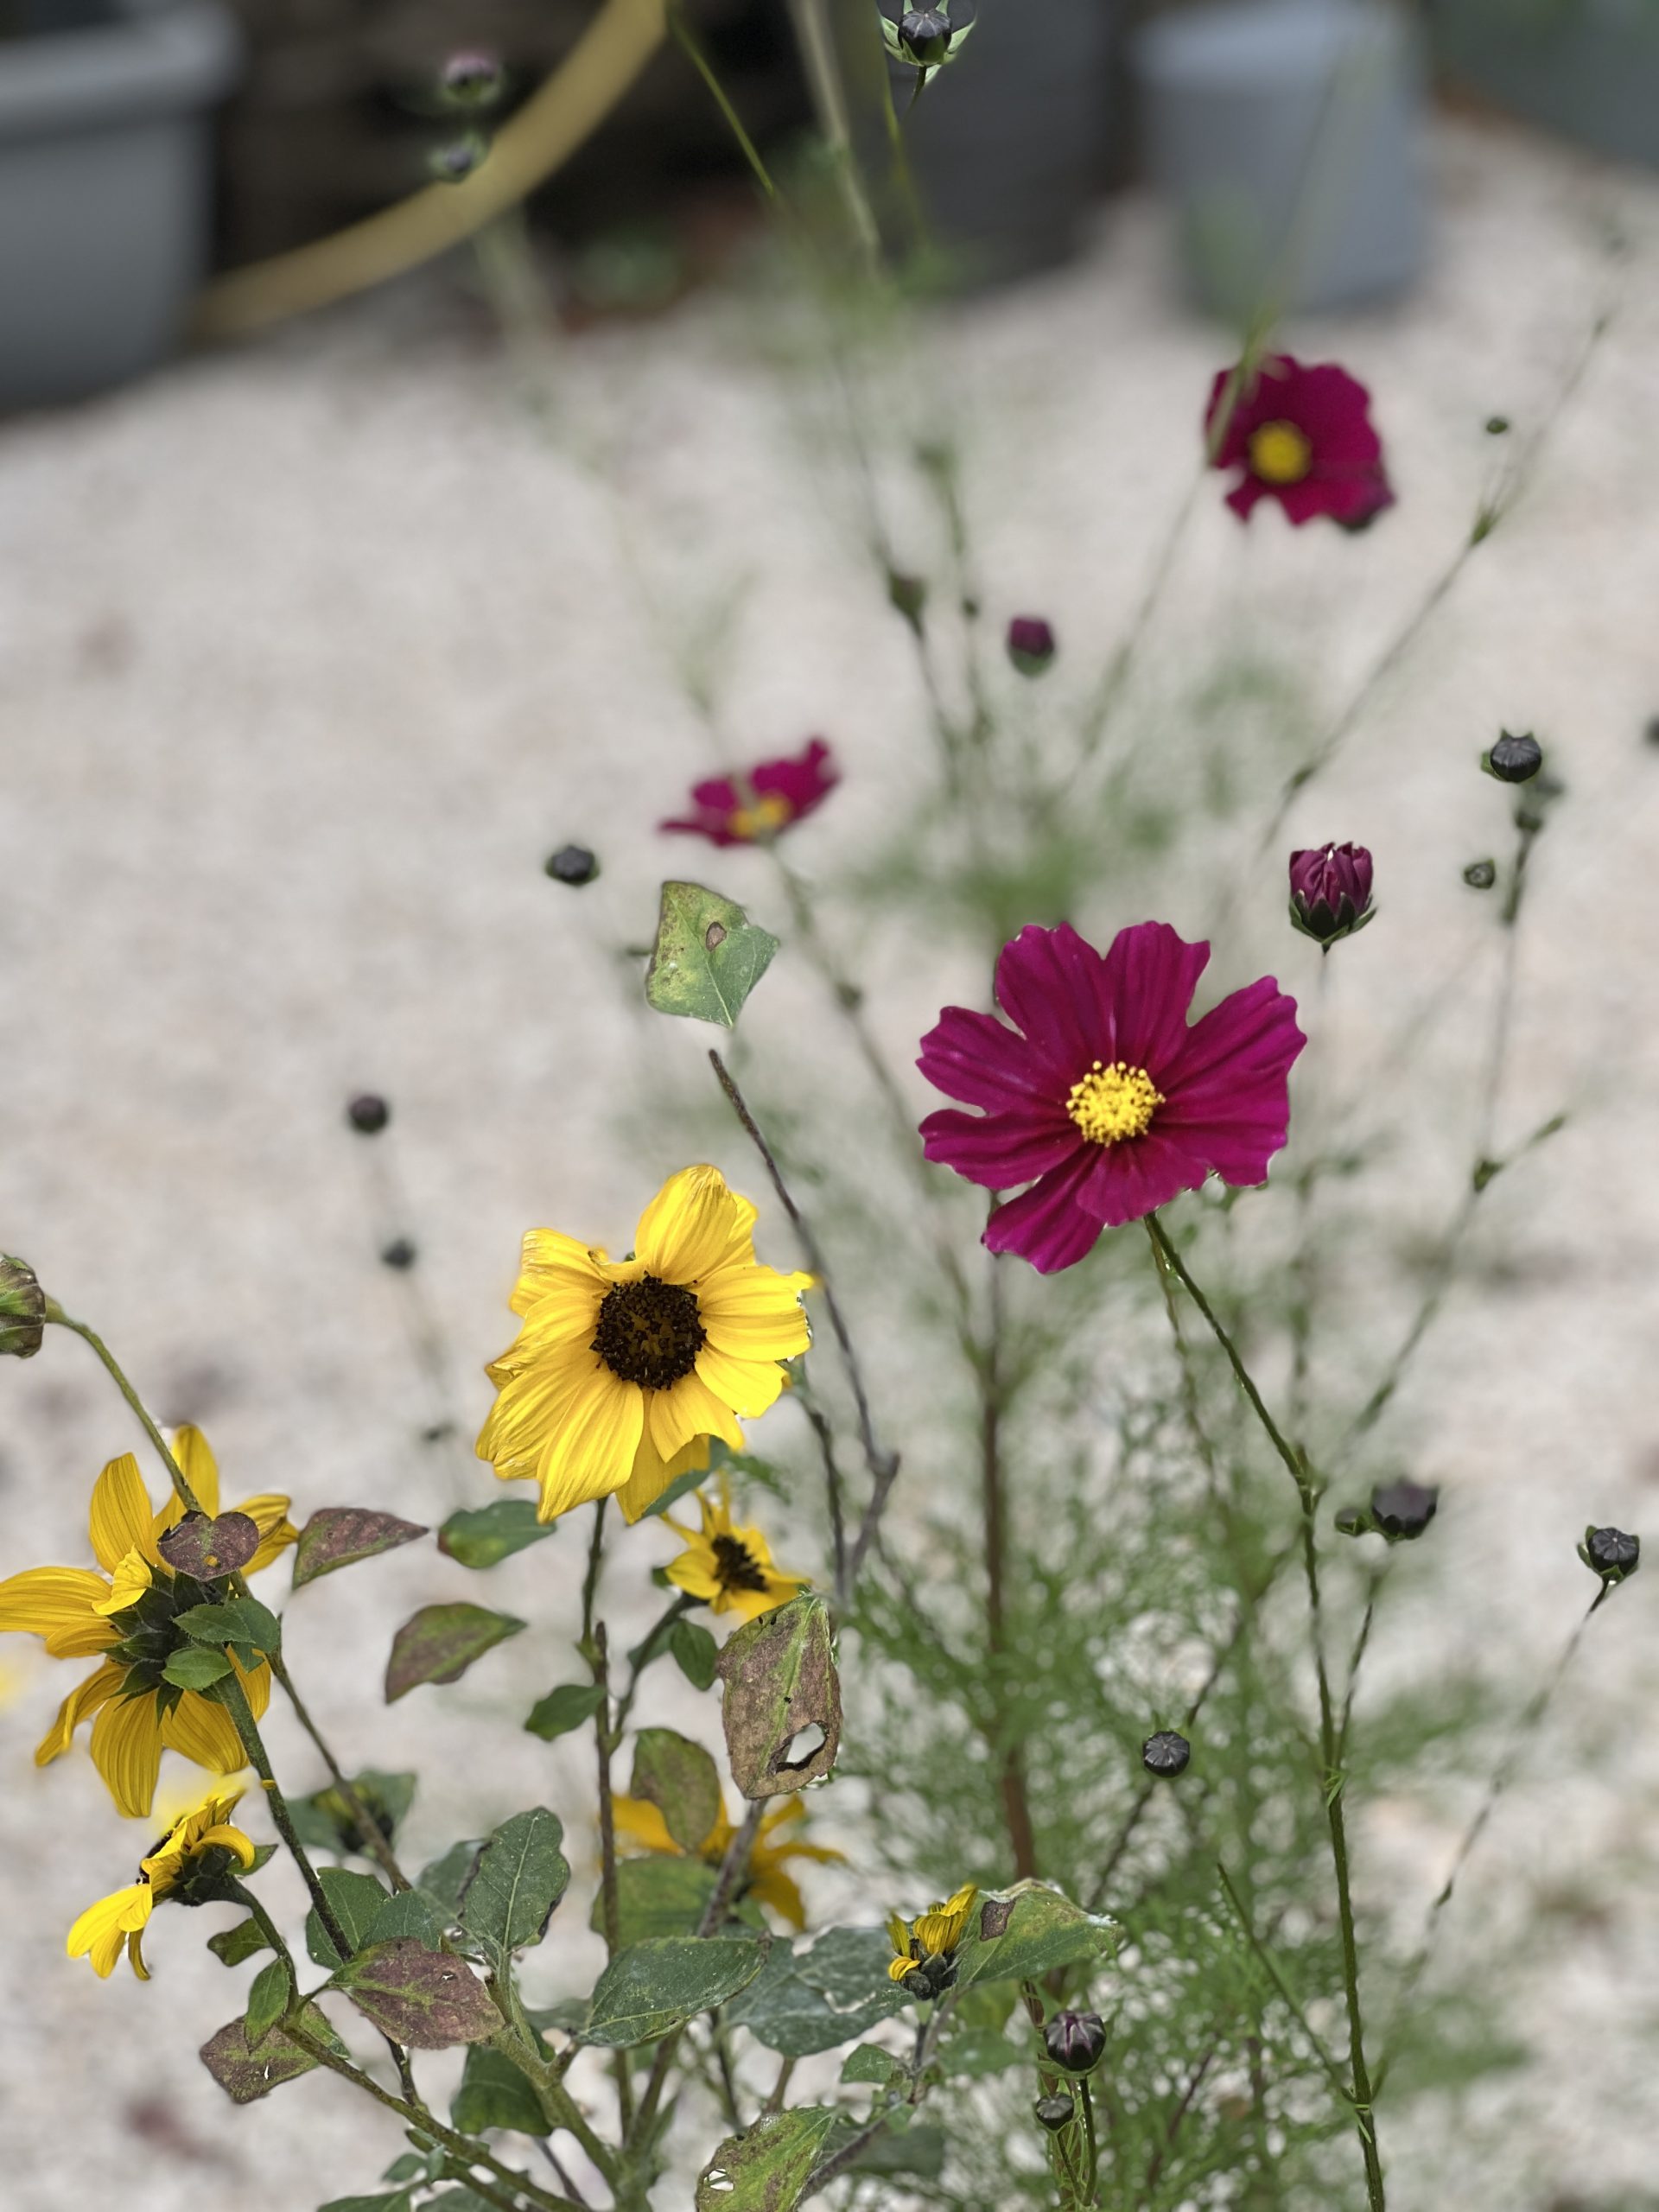 Colourful cosmos flowers.